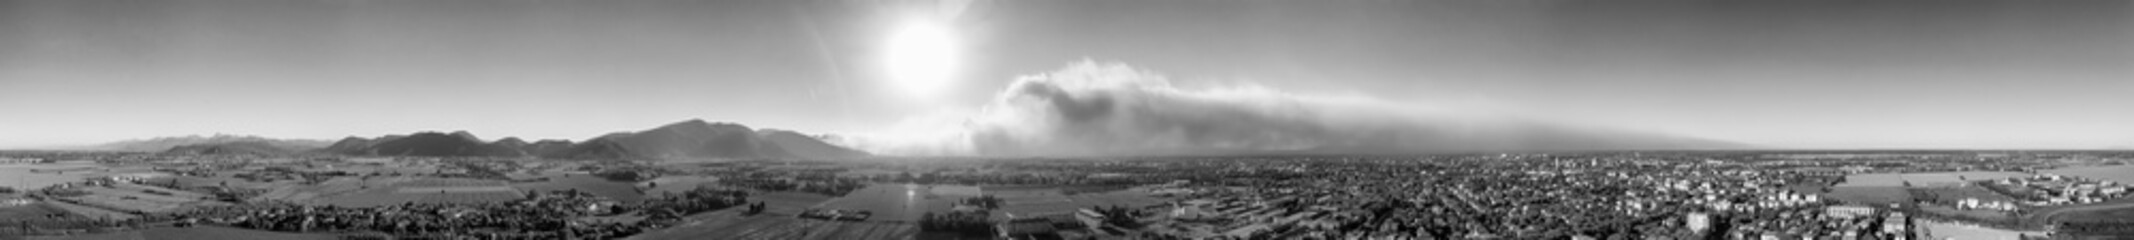 Aerial view of countryside with Arson. Smoke towards the sky, view from drone